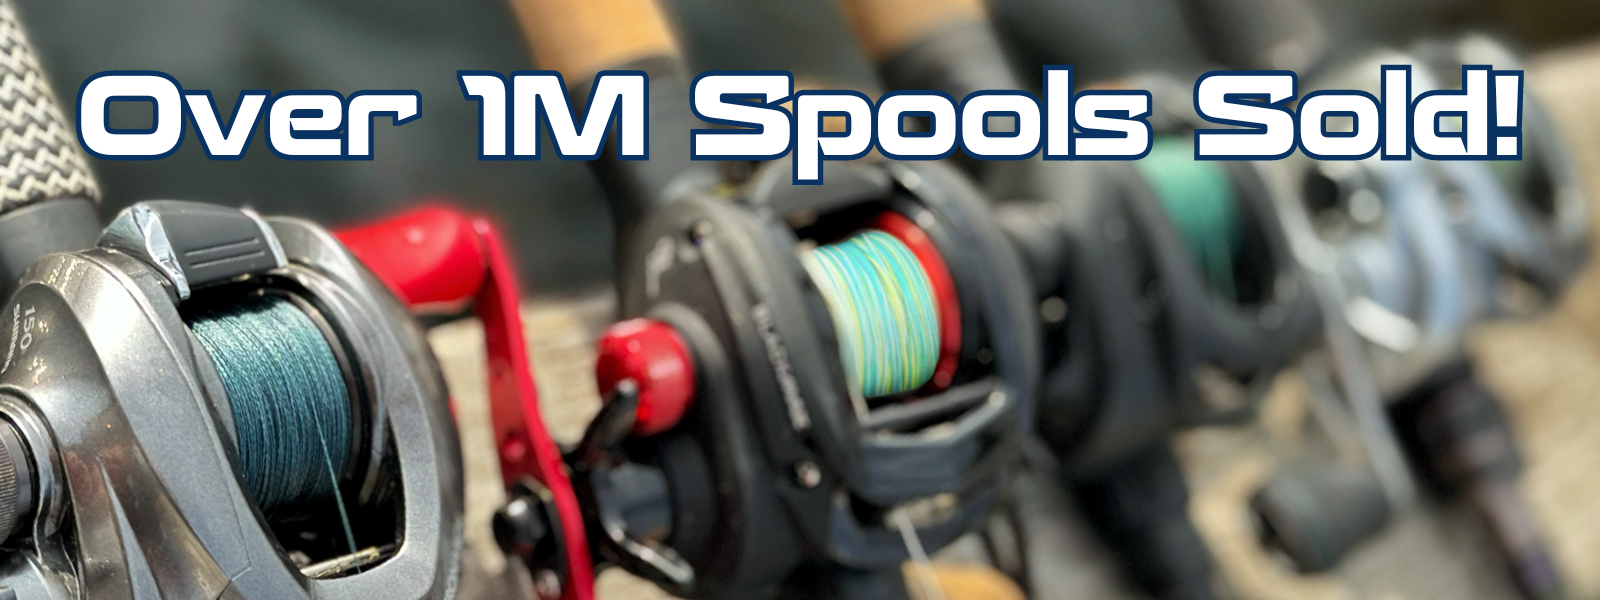 Over 1 Million Spools Sold!